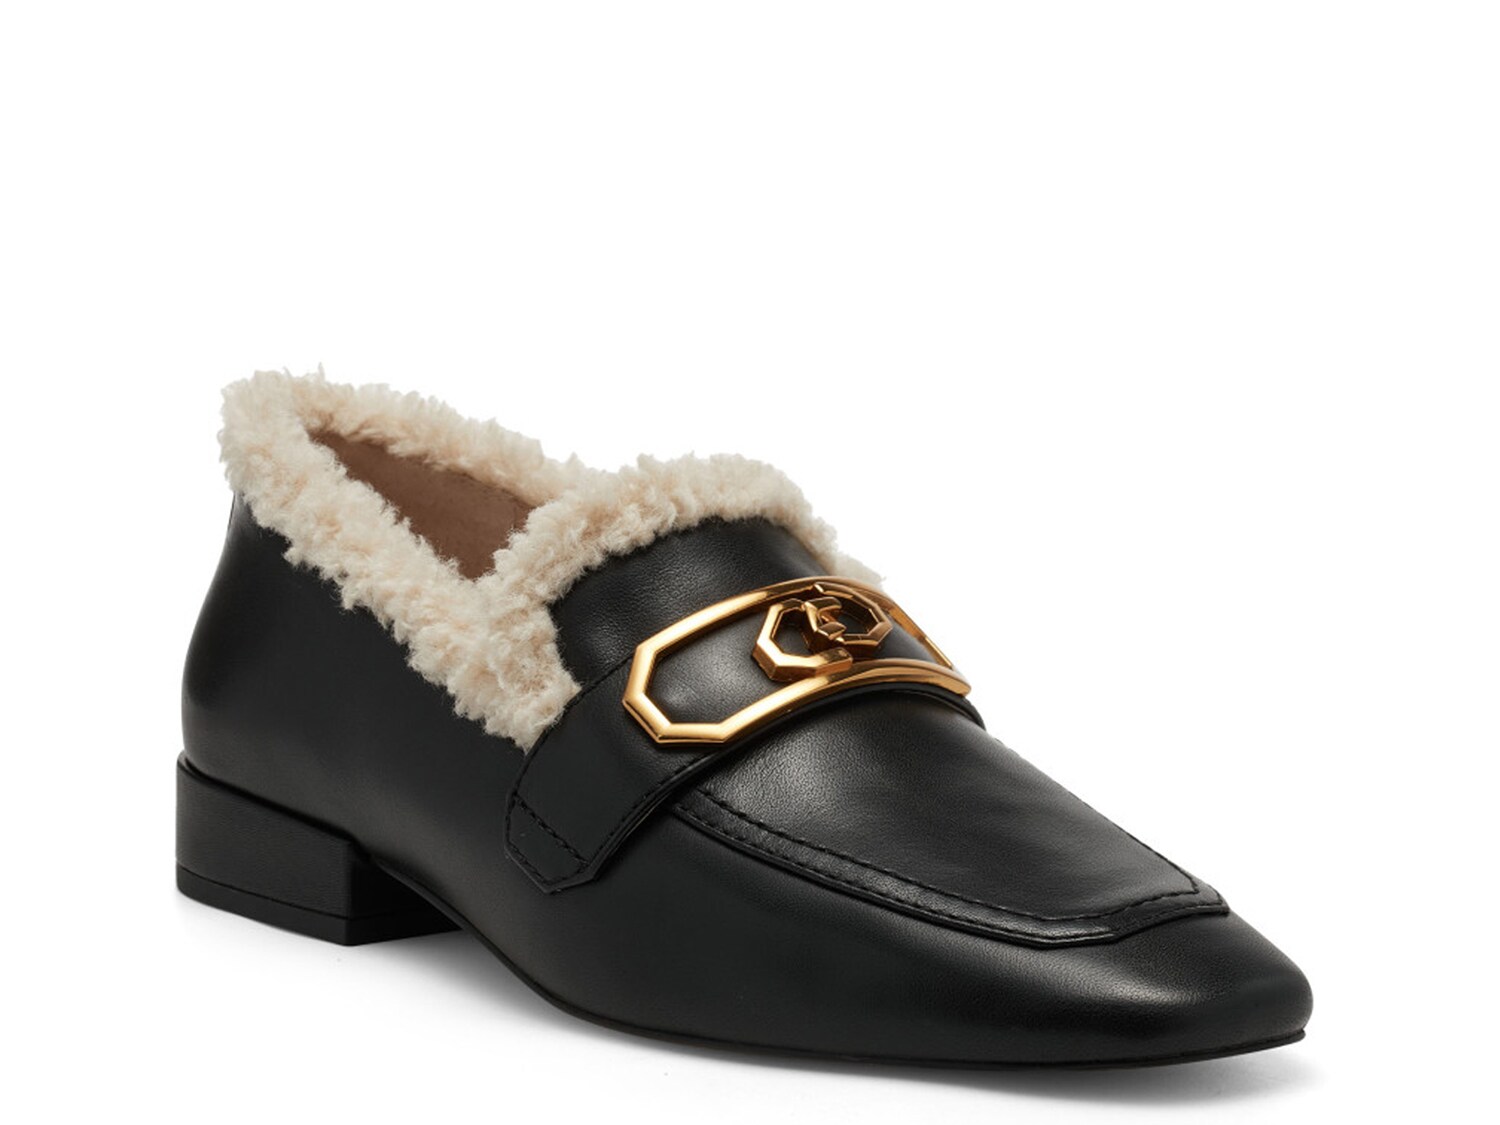 Louise et Cie Leather Loafers - Everland